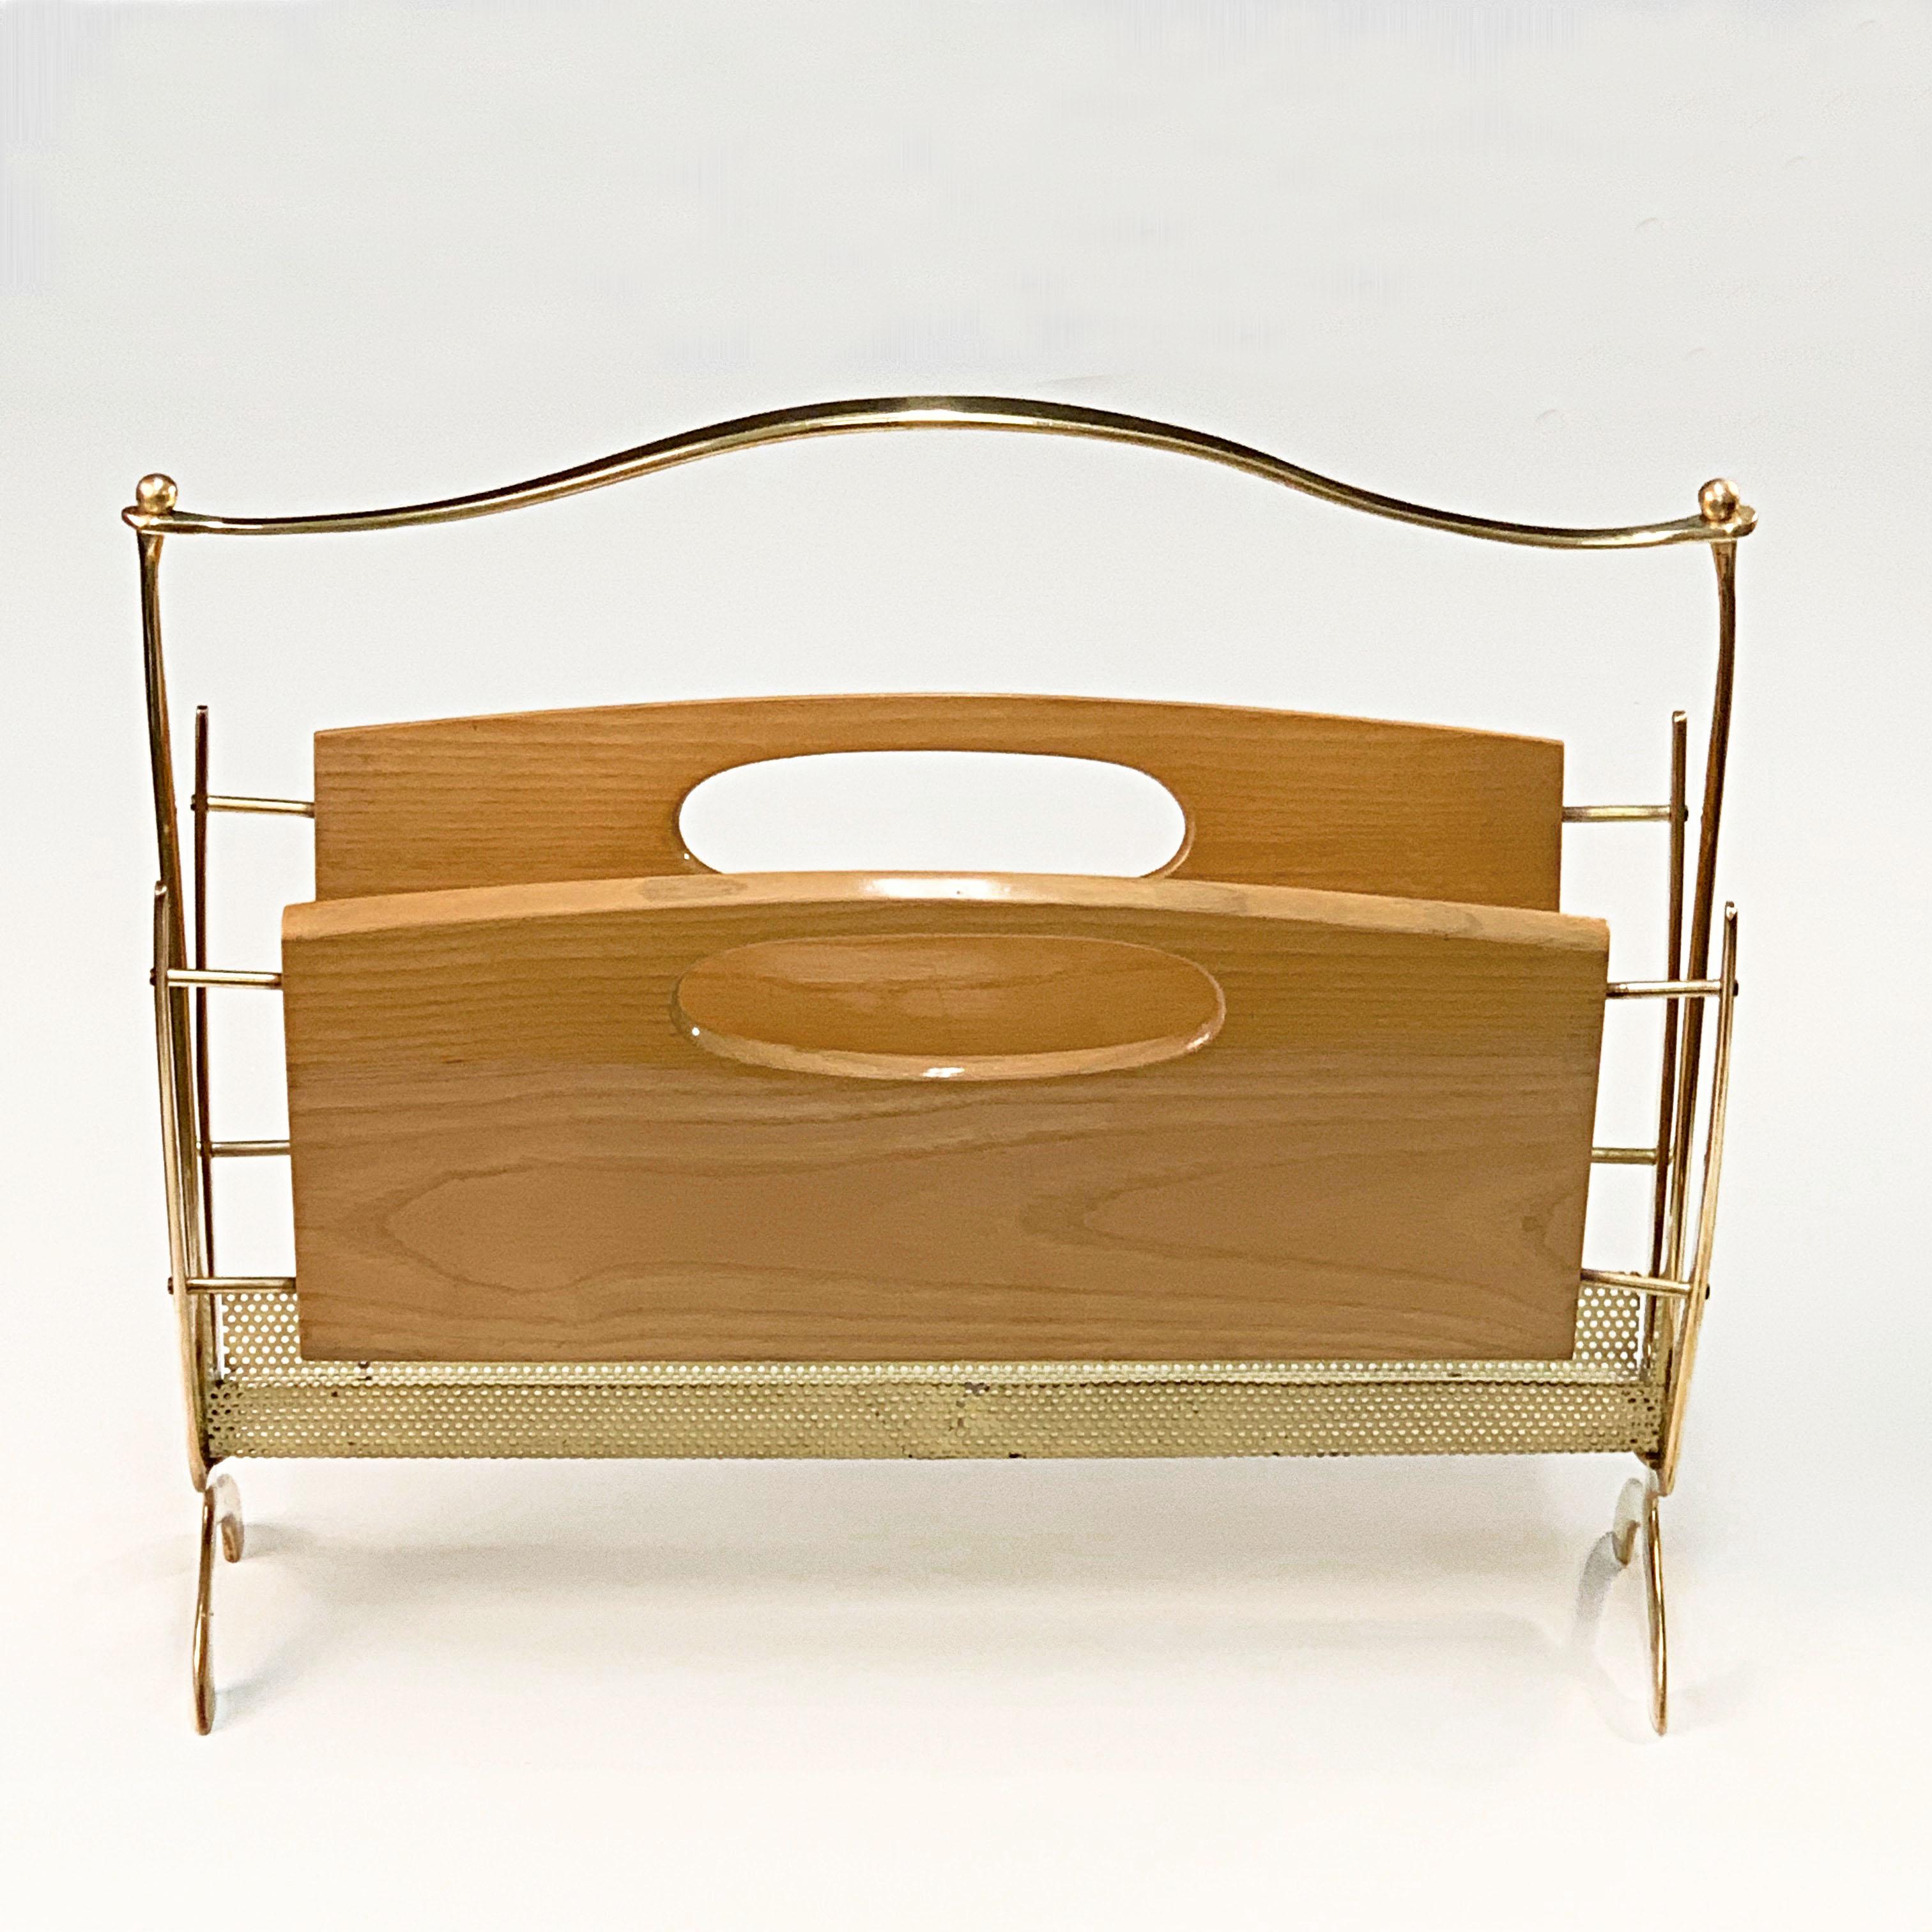 Maison Baguès Midcentury Brass and Chestnut Wood French Magazine Rack, 1950s For Sale 4